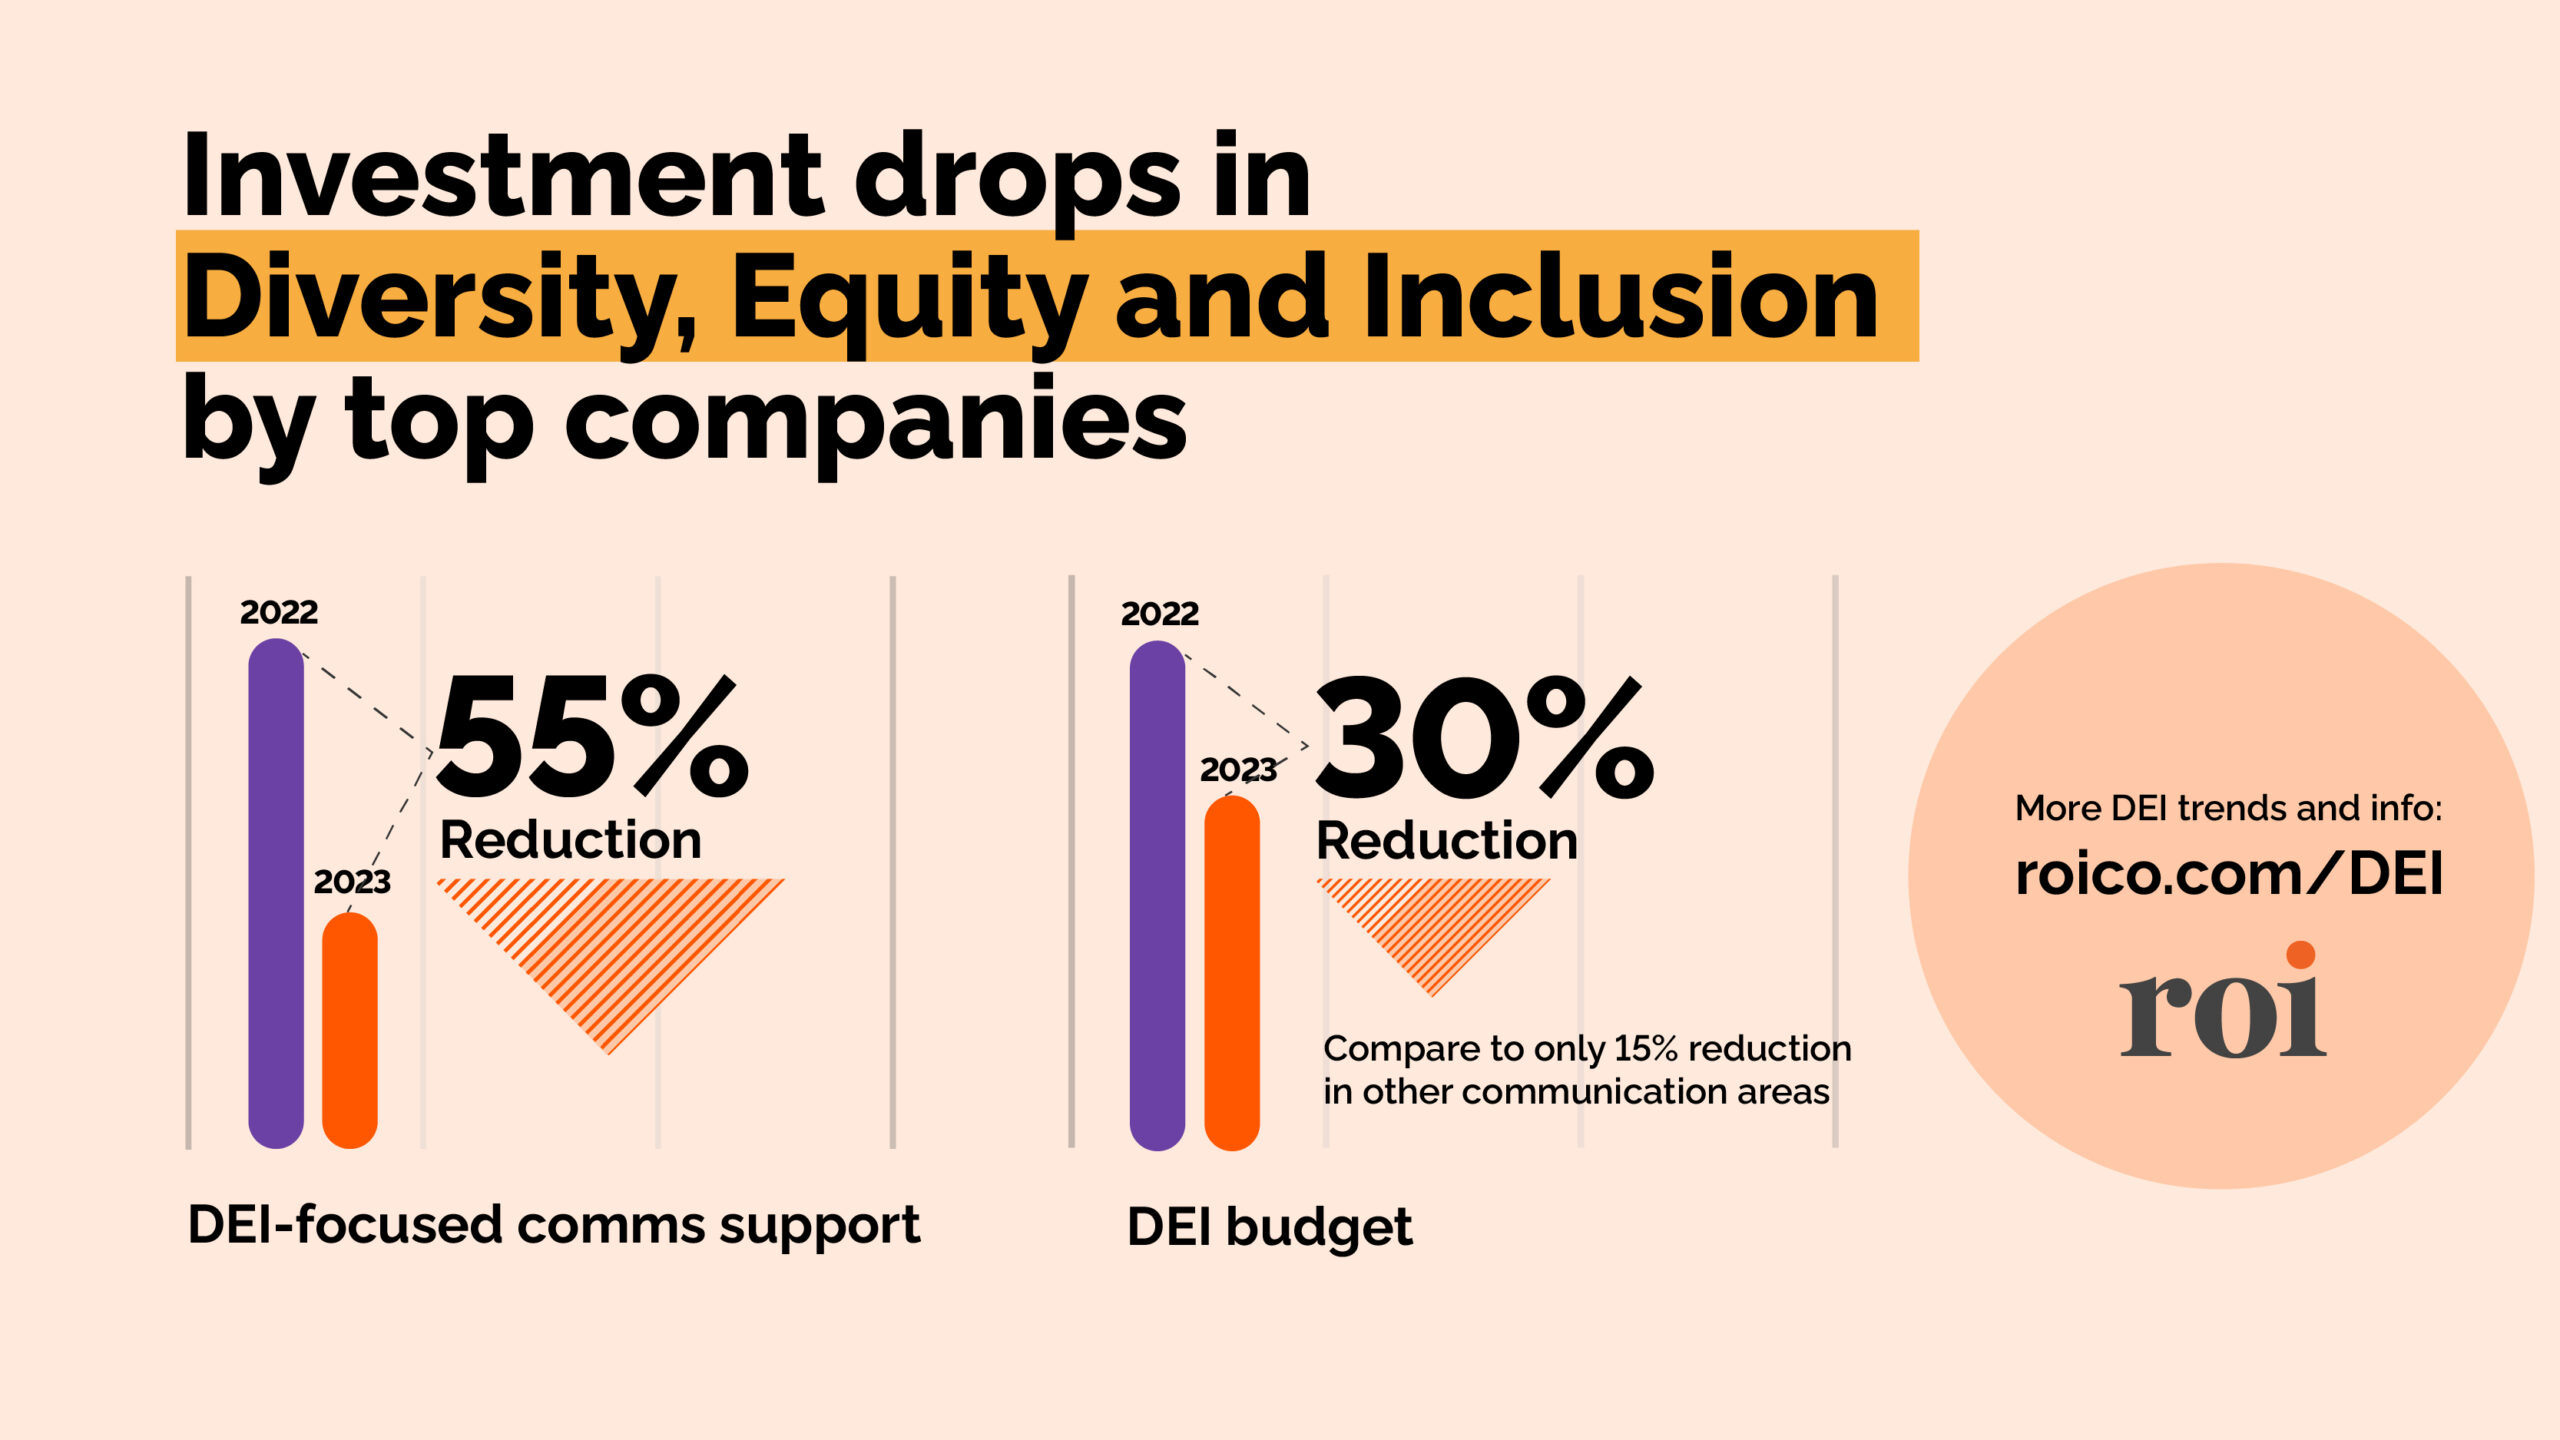 Investment drops in Diversity, Equity and Inclusion by top companies.